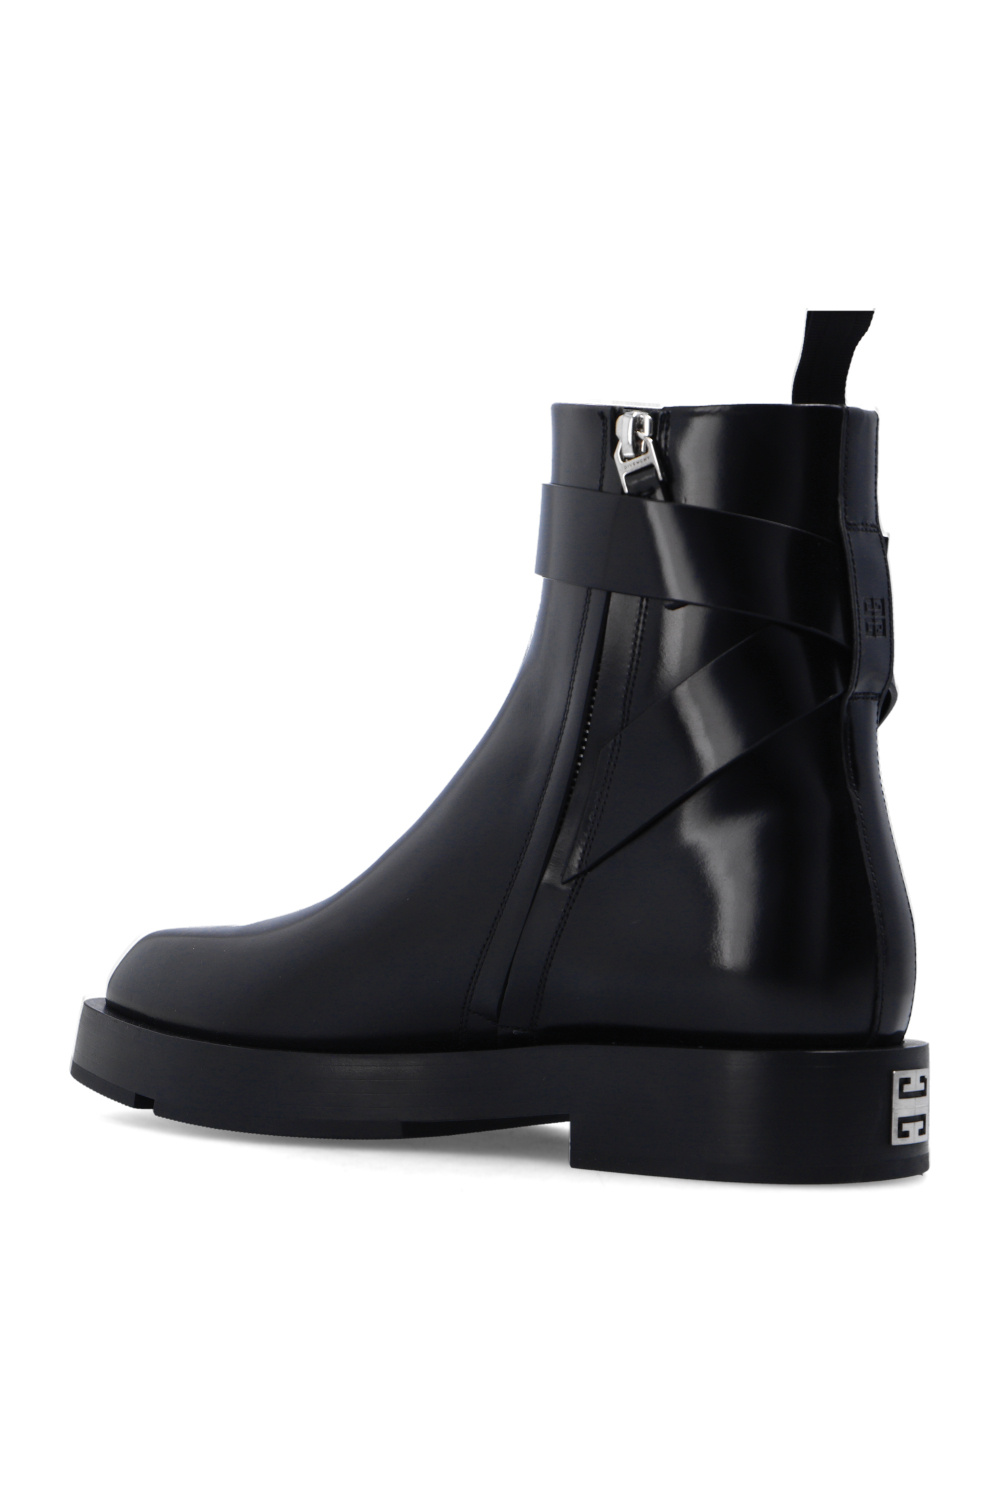 givenchy SANDALS Leather ankle boots